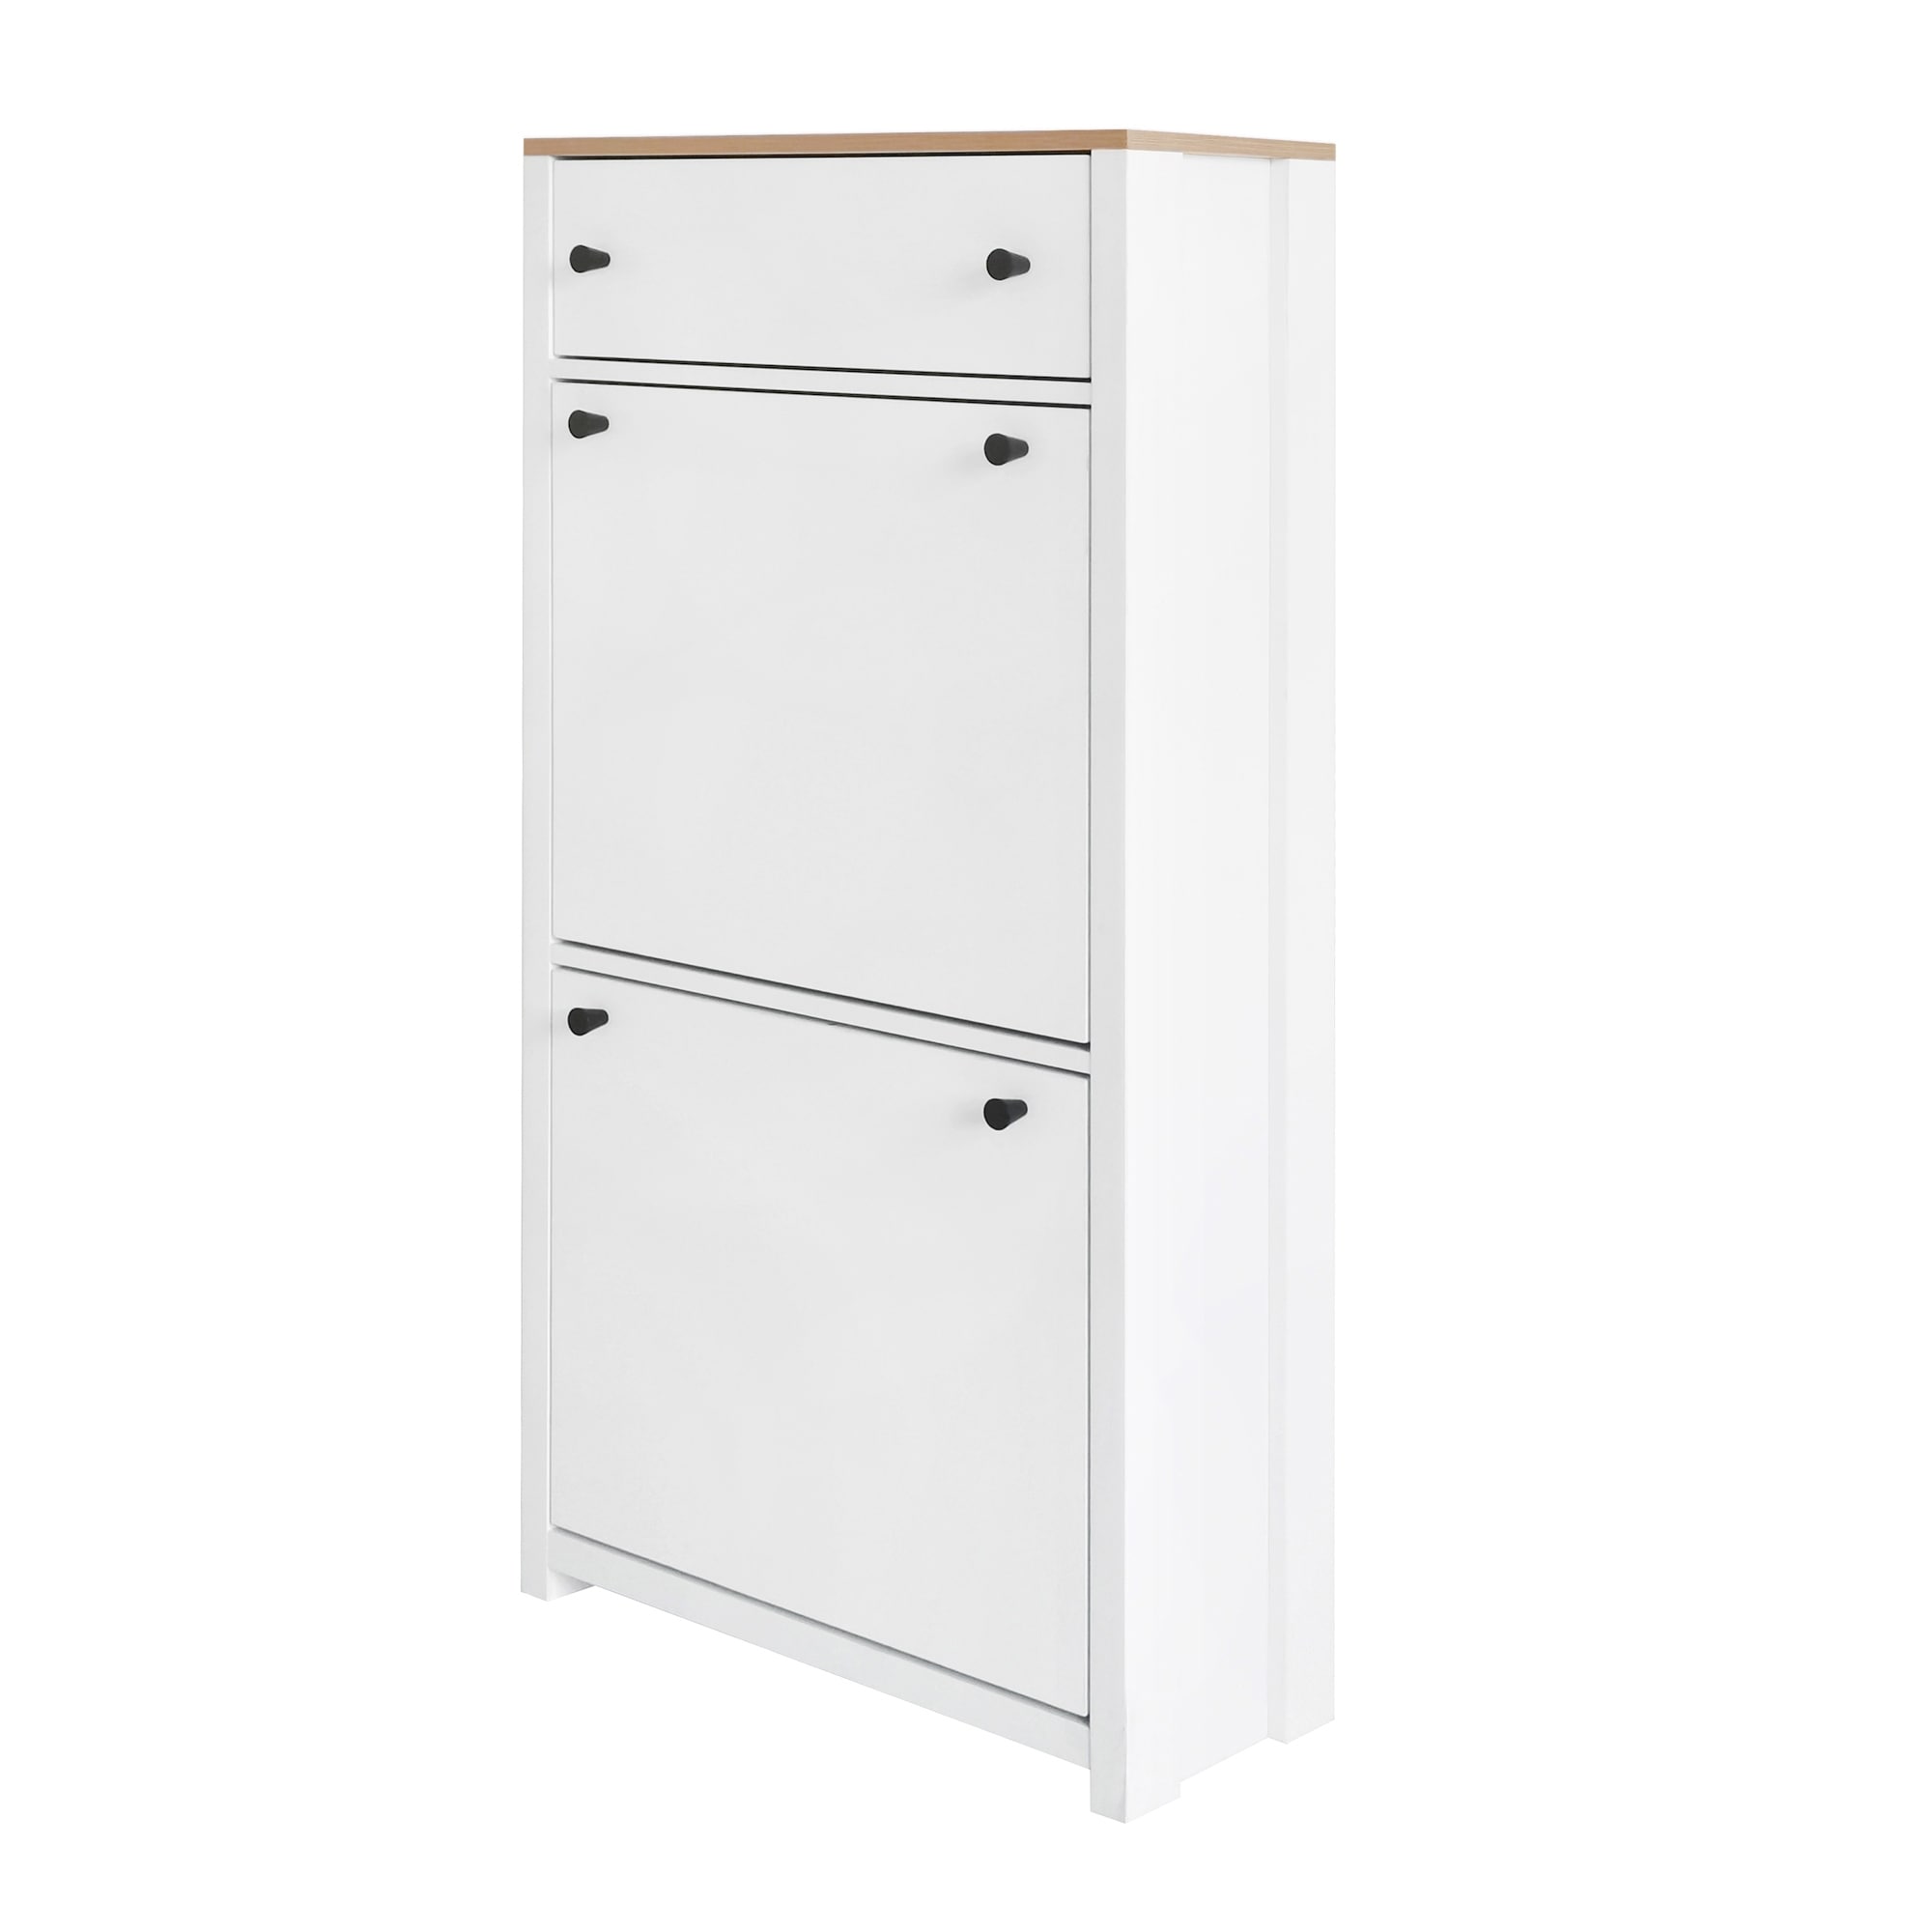 https://ak1.ostkcdn.com/images/products/is/images/direct/2e553c4f2377807c8dd7ba8f6ca534f228c75337/Shoe-Cabinet-with-4-Flip-Drawers%2C-Entryway-Shoe-Storage-Cabinet-with-Adjustable-Panel%2C-Free-Standing-Shoe-Rack-Storage-Organizer.jpg